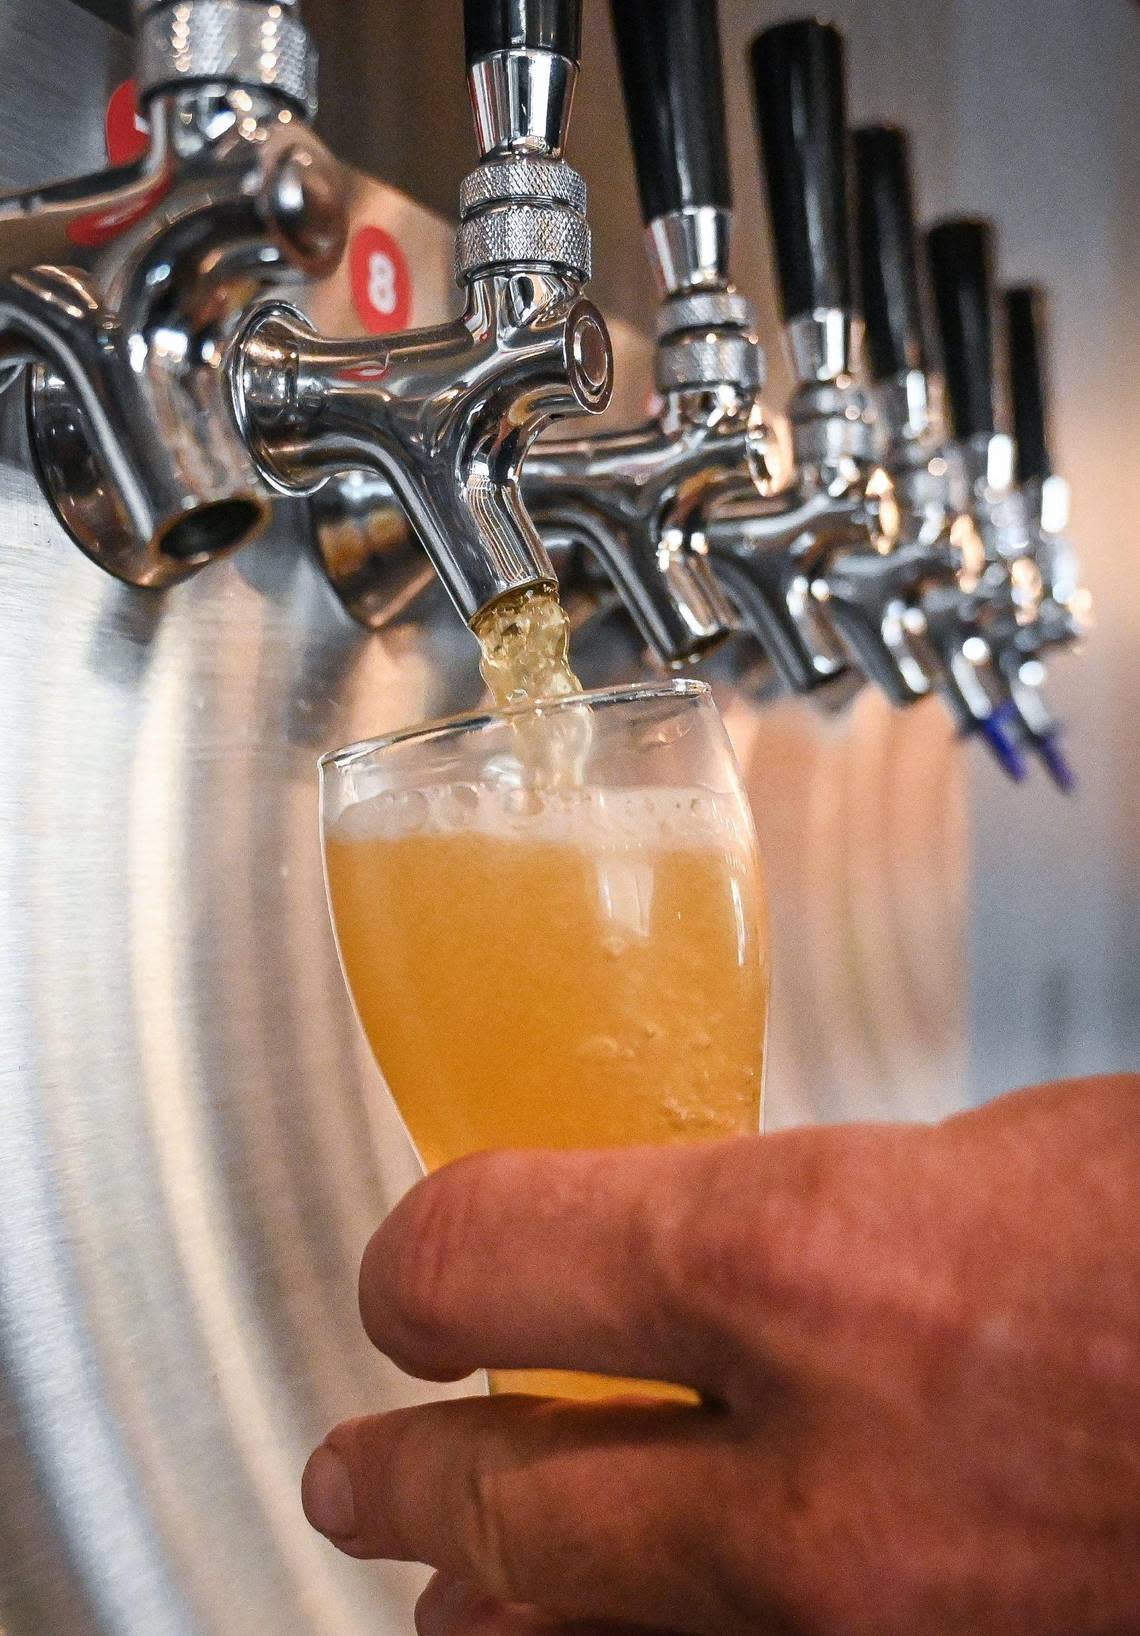 Marc Dyson, owner of Two Ravens Brewery & Taproom, pours 8 ounces of the brewery’s Nordic Fog hazy IPA at his new taproom opening on Shaw and Academy east of Clovis, on Wednesday, Aug. 31, 2022.